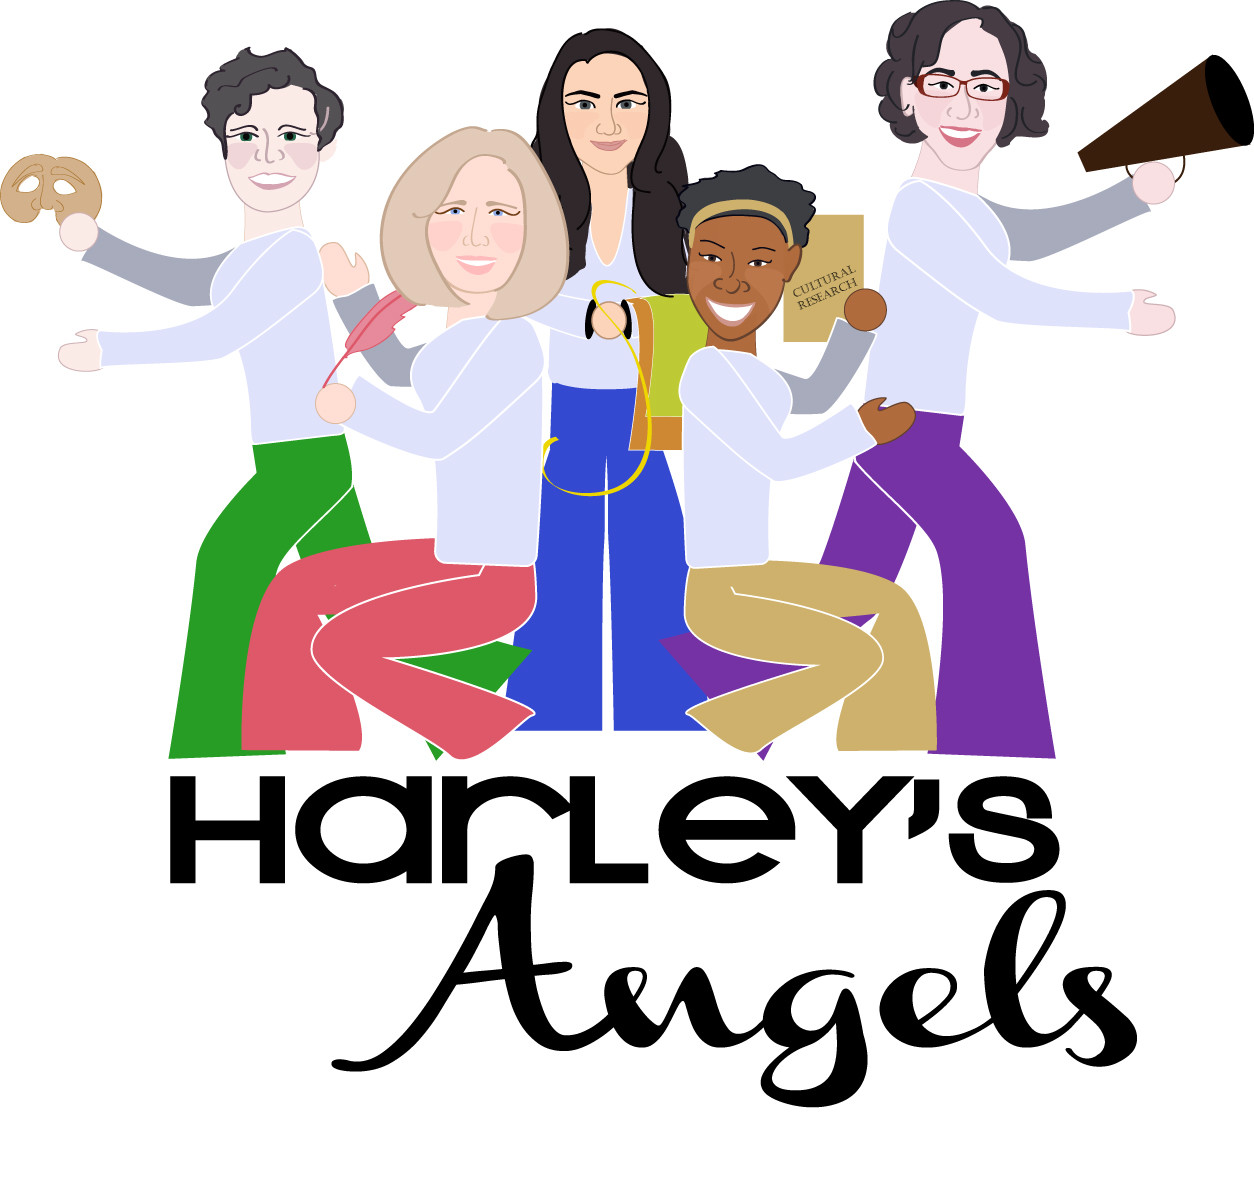 Harley's Angels graphic created by PageLauncher